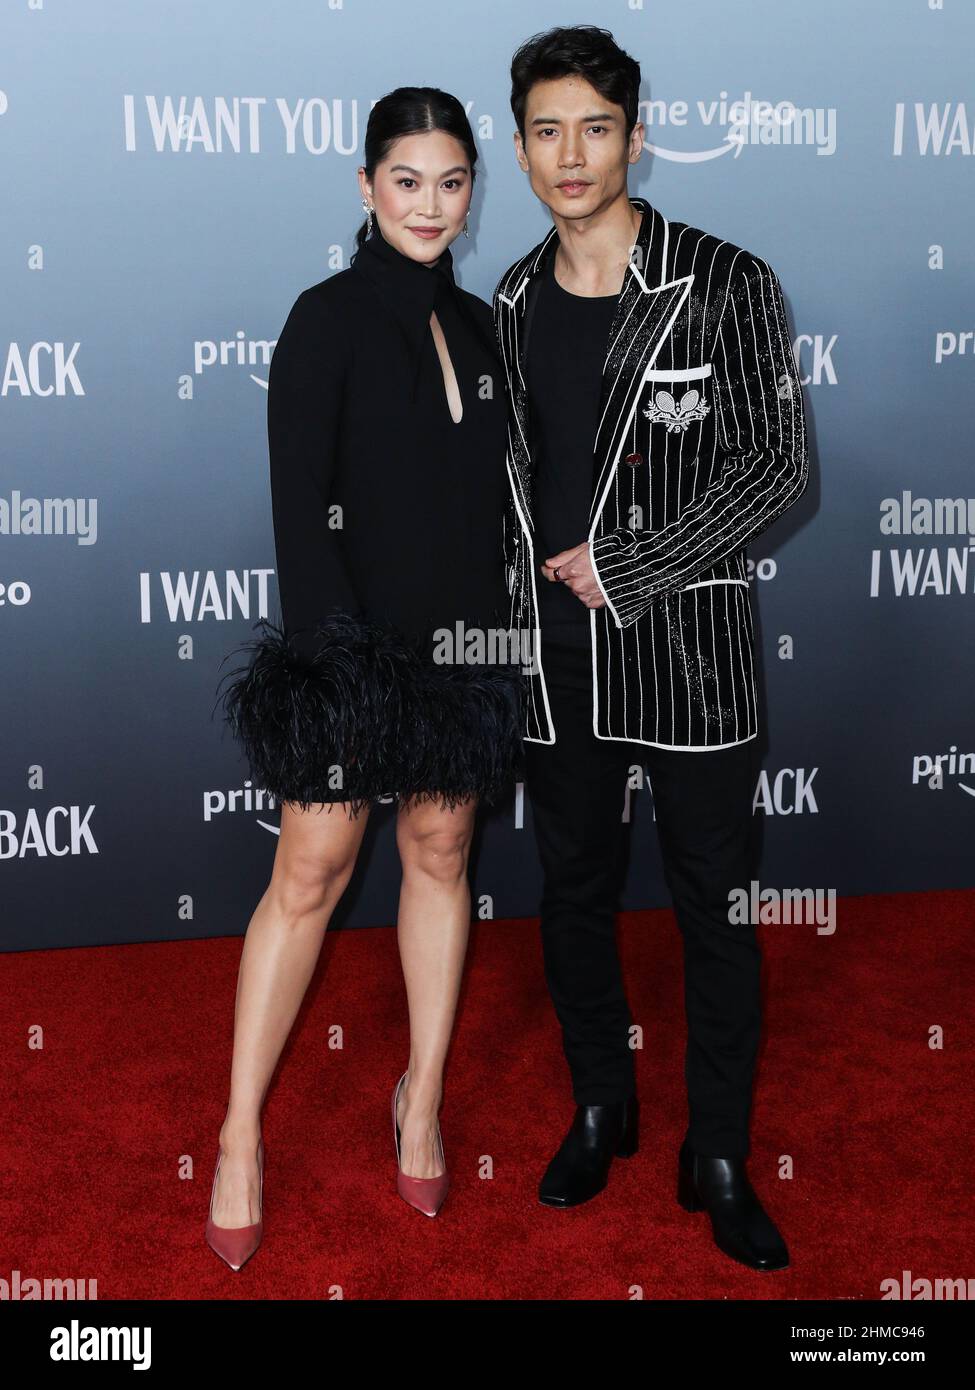 Los Angeles, United States. 08th Feb, 2022. LOS ANGELES, CALIFORNIA, USA - FEBRUARY 08: Actress Dianne Doan and boyfriend/actor Manny Jacinto arrive at the Los Angeles Premiere Of Amazon Prime's 'I Want You Back' held at ROW DTLA on February 8, 2022 in Los Angeles, California, United States. (Photo by Xavier Collin/Image Press Agency) Credit: Image Press Agency/Alamy Live News Stock Photo